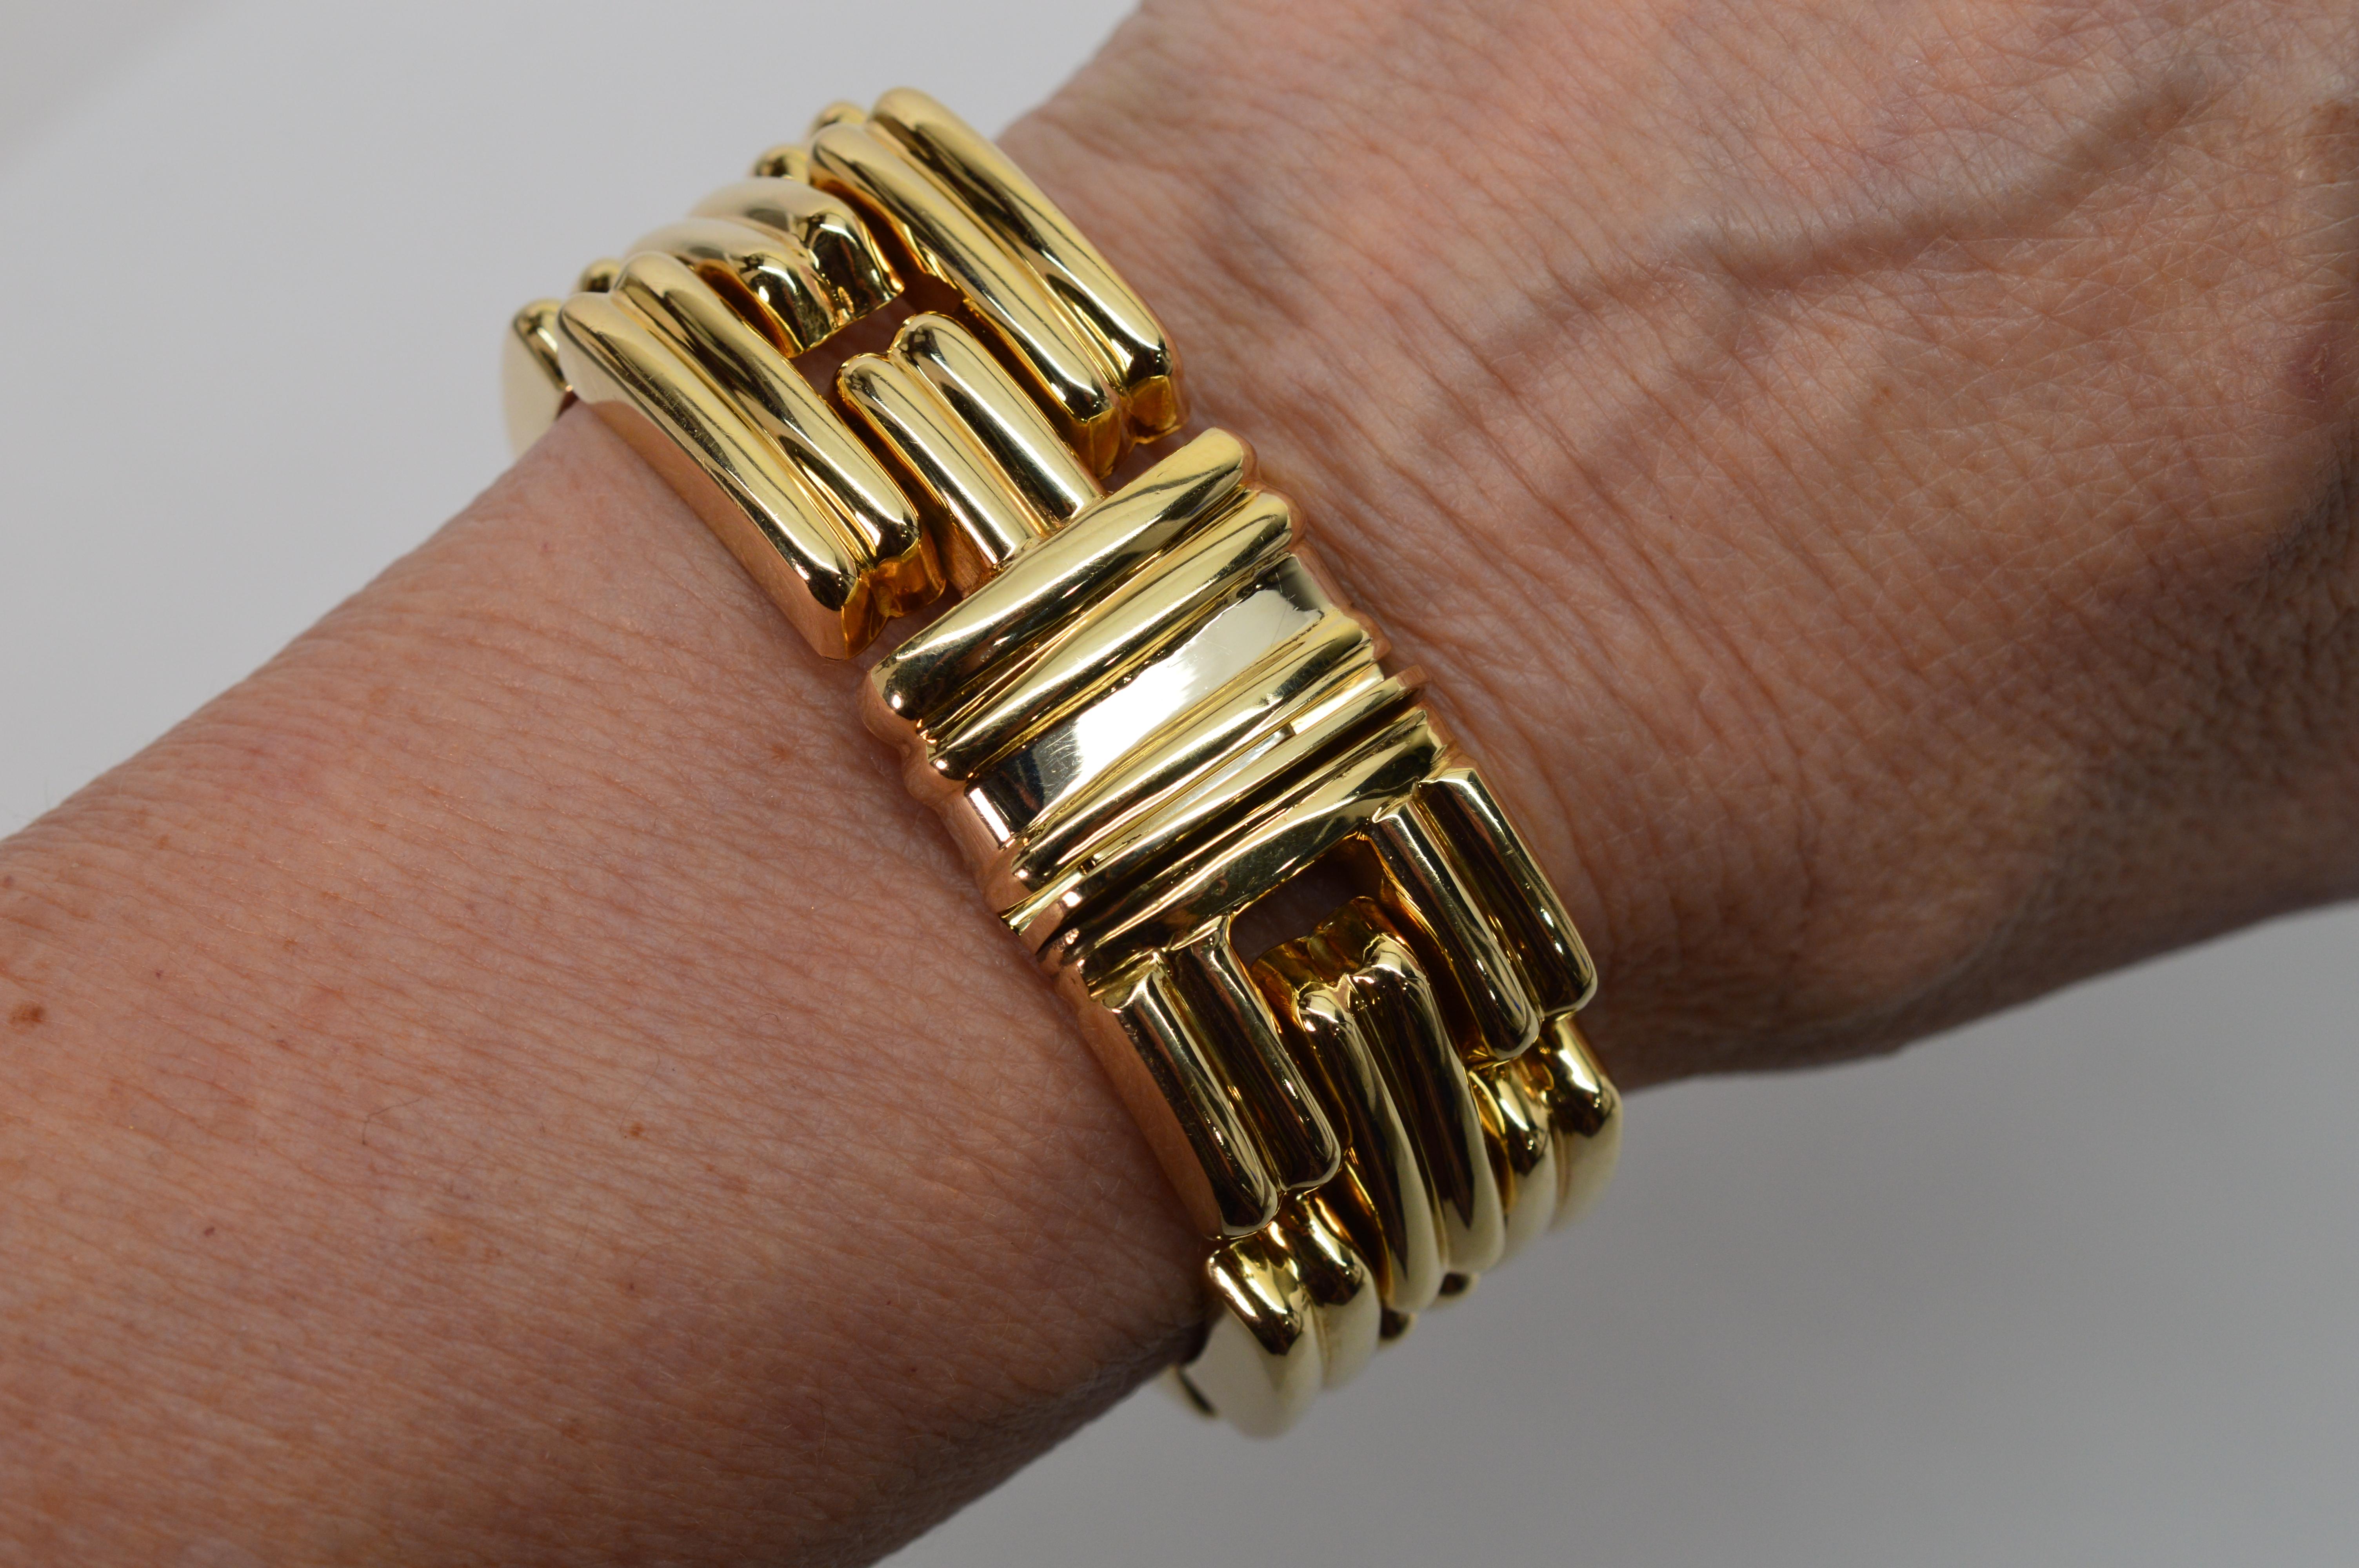 Superb Italian craftsmanship is evident in this highly polished fourteen karat 14K yellow gold Retro bracelet. Three rows of individually hinged stylized links give this bold statement bracelet its fluid movement. The buckle inspired detail can be